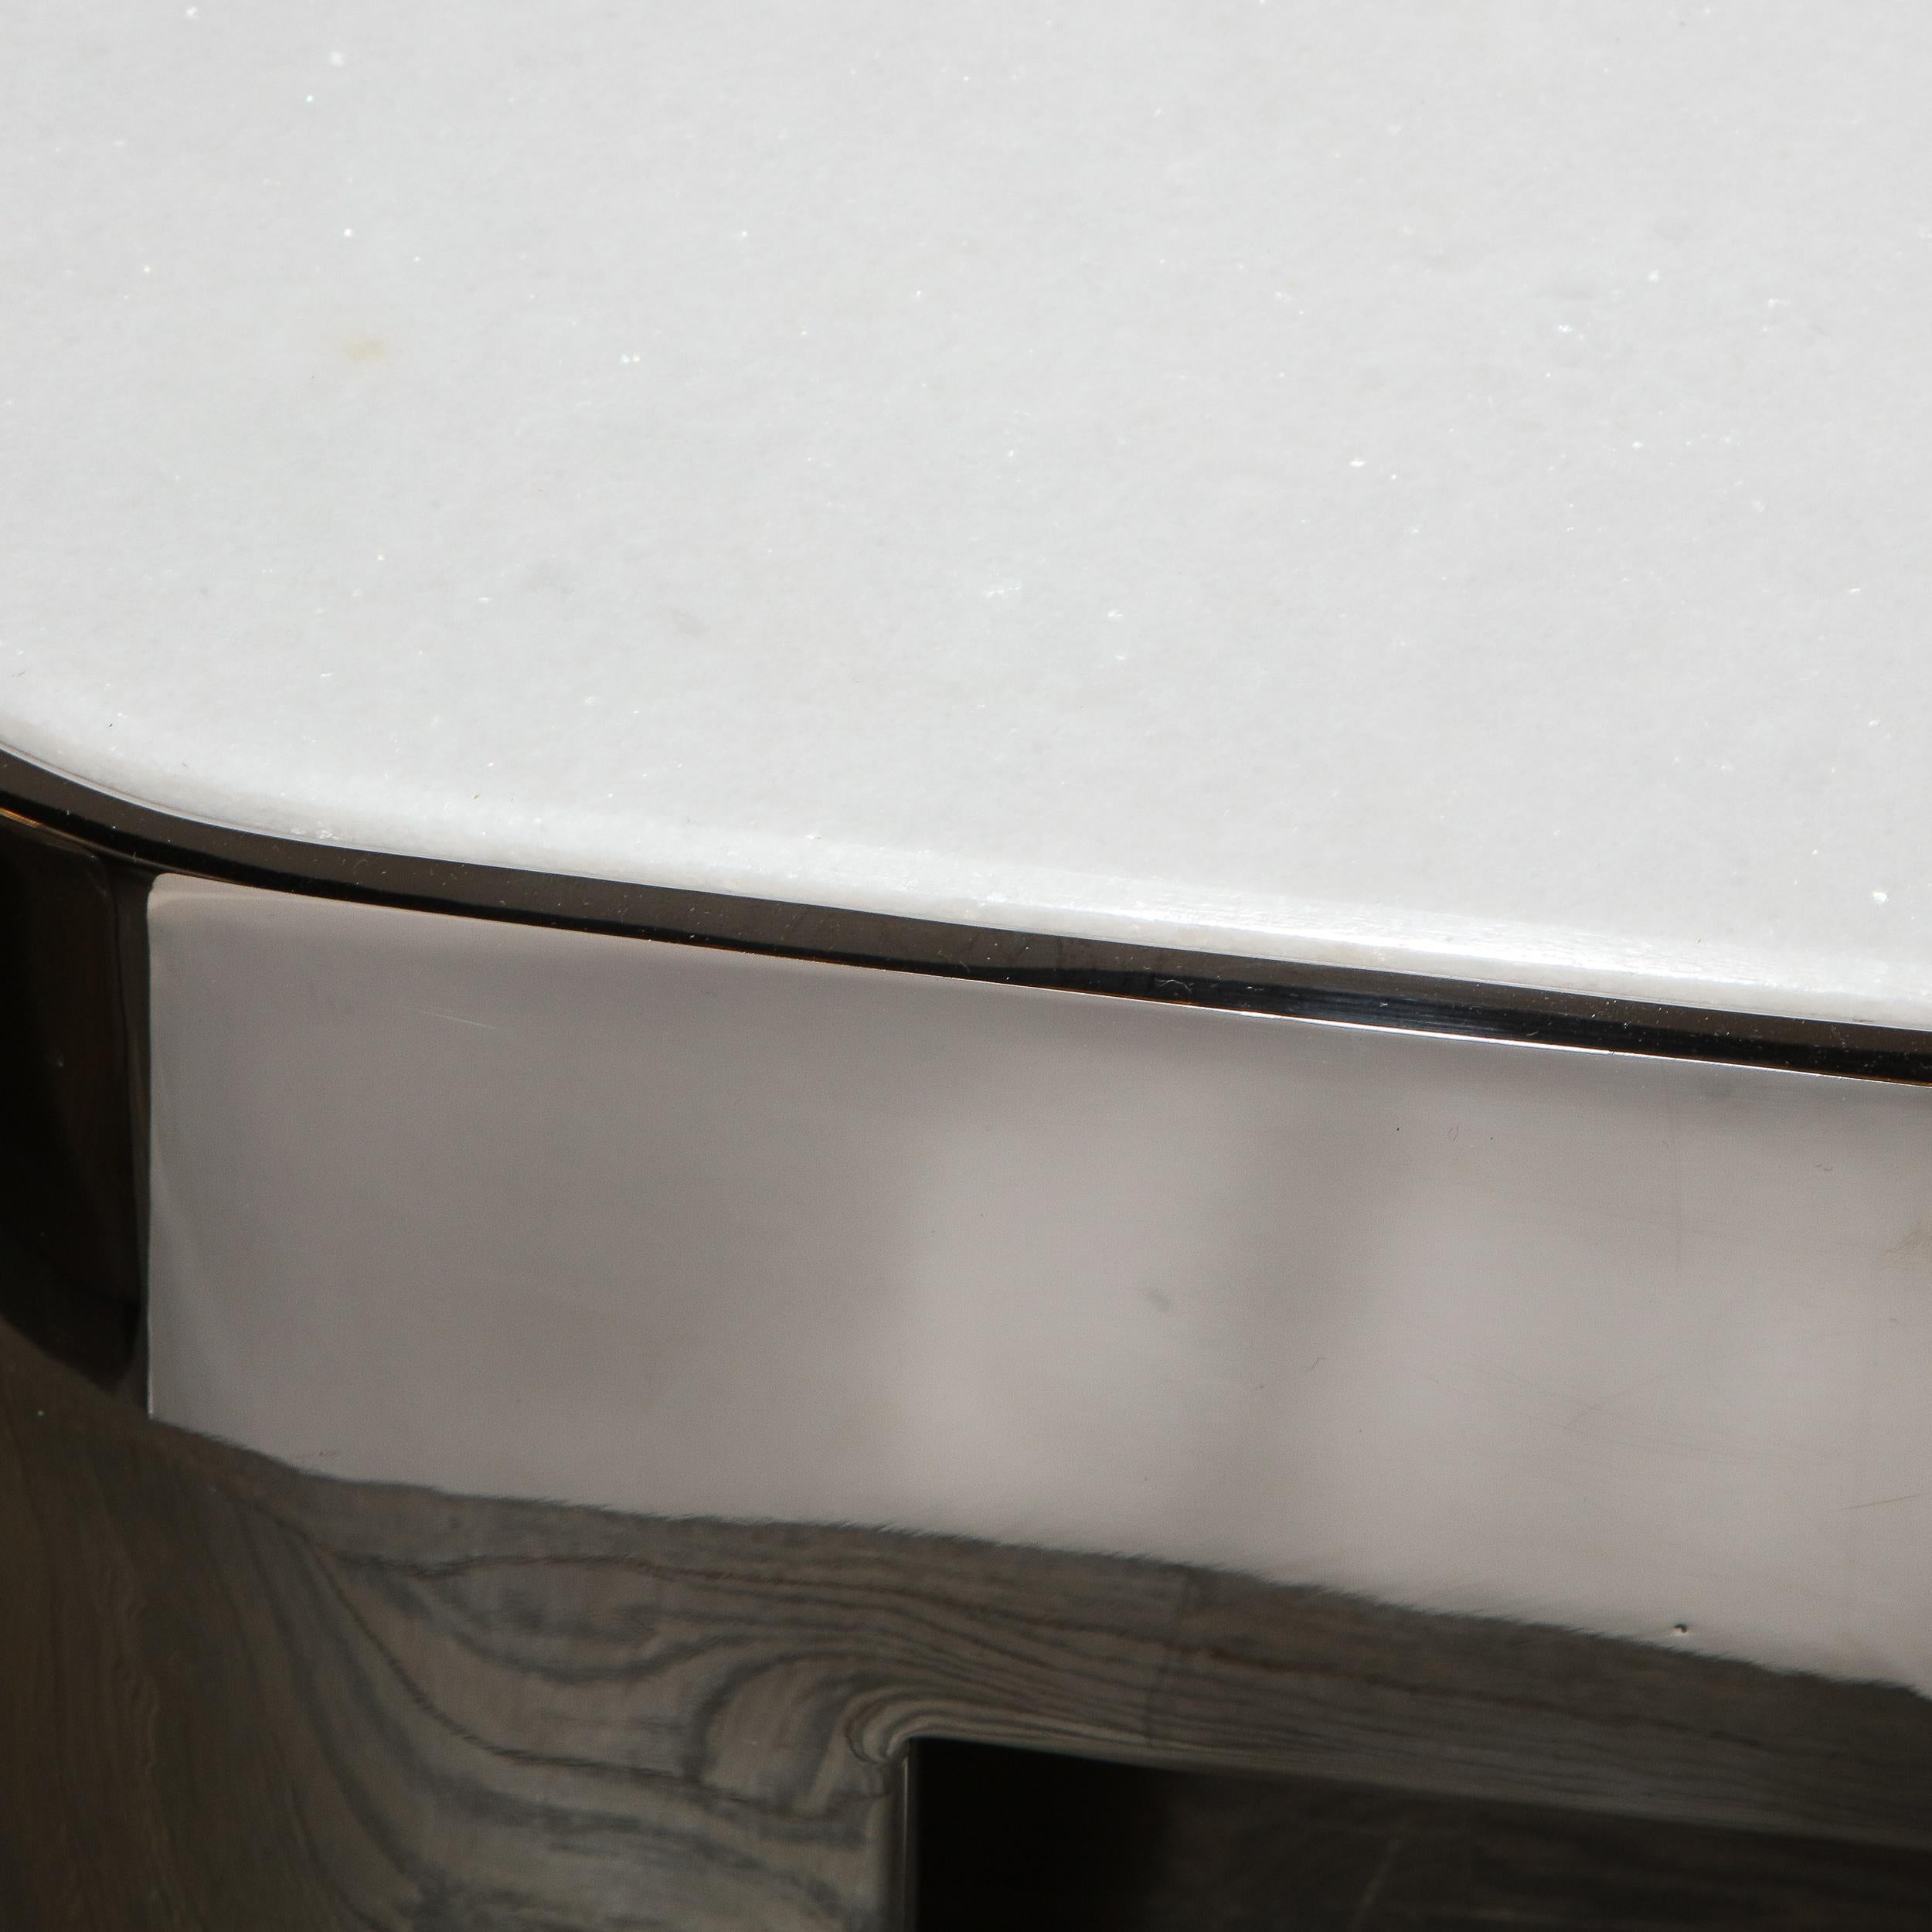 Late 20th Century Mid-Century Modern Polished Chrome & White Granite Cocktail Table by Ron Seff